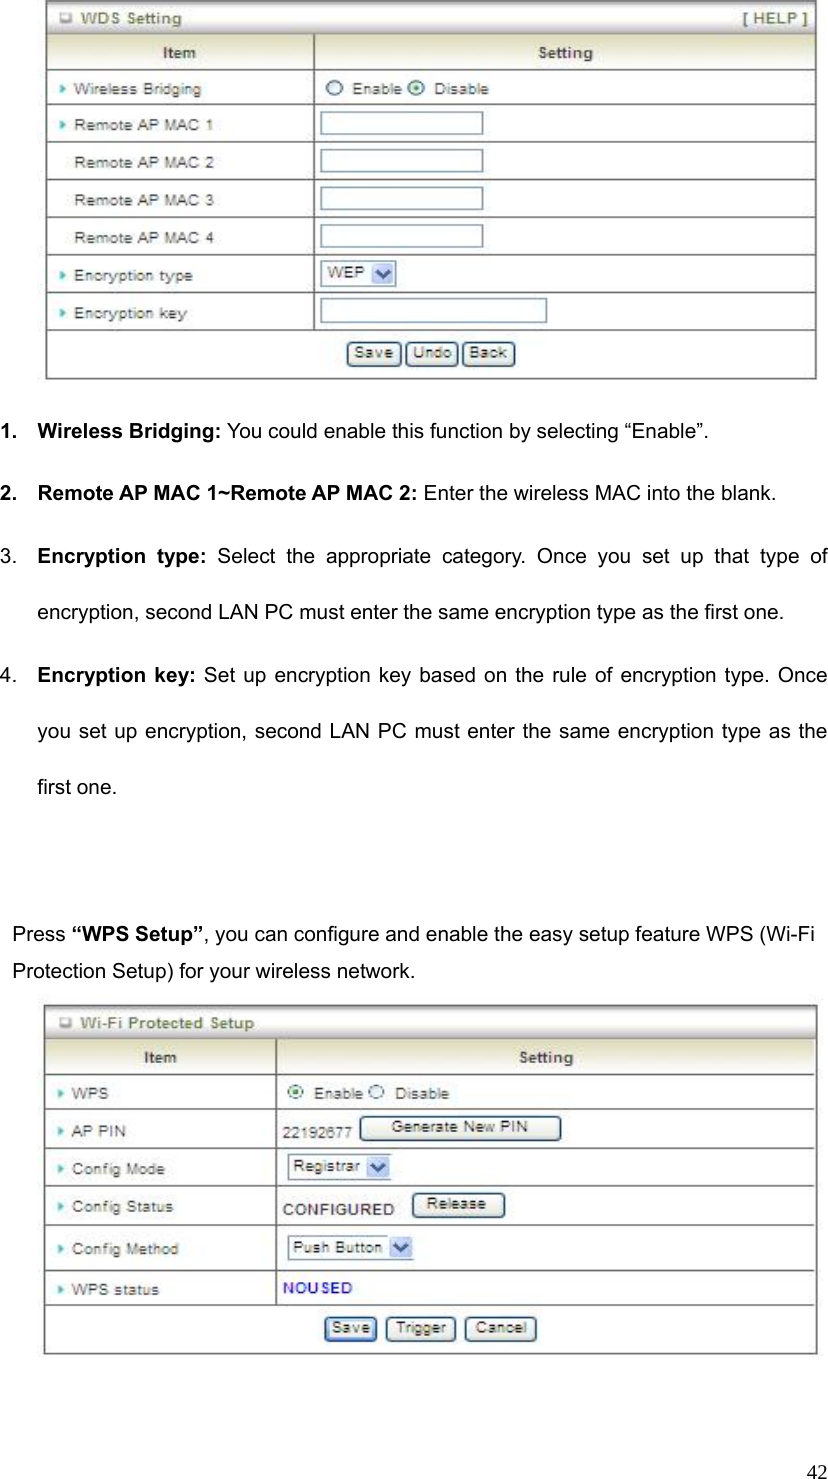  42 1. Wireless Bridging: You could enable this function by selecting “Enable”.  2.  Remote AP MAC 1~Remote AP MAC 2: Enter the wireless MAC into the blank.   3.  Encryption type: Select the appropriate category. Once you set up that type of encryption, second LAN PC must enter the same encryption type as the first one.     4.  Encryption key: Set up encryption key based on the rule of encryption type. Once you set up encryption, second LAN PC must enter the same encryption type as the first one.     Press “WPS Setup”, you can configure and enable the easy setup feature WPS (Wi-Fi Protection Setup) for your wireless network.      